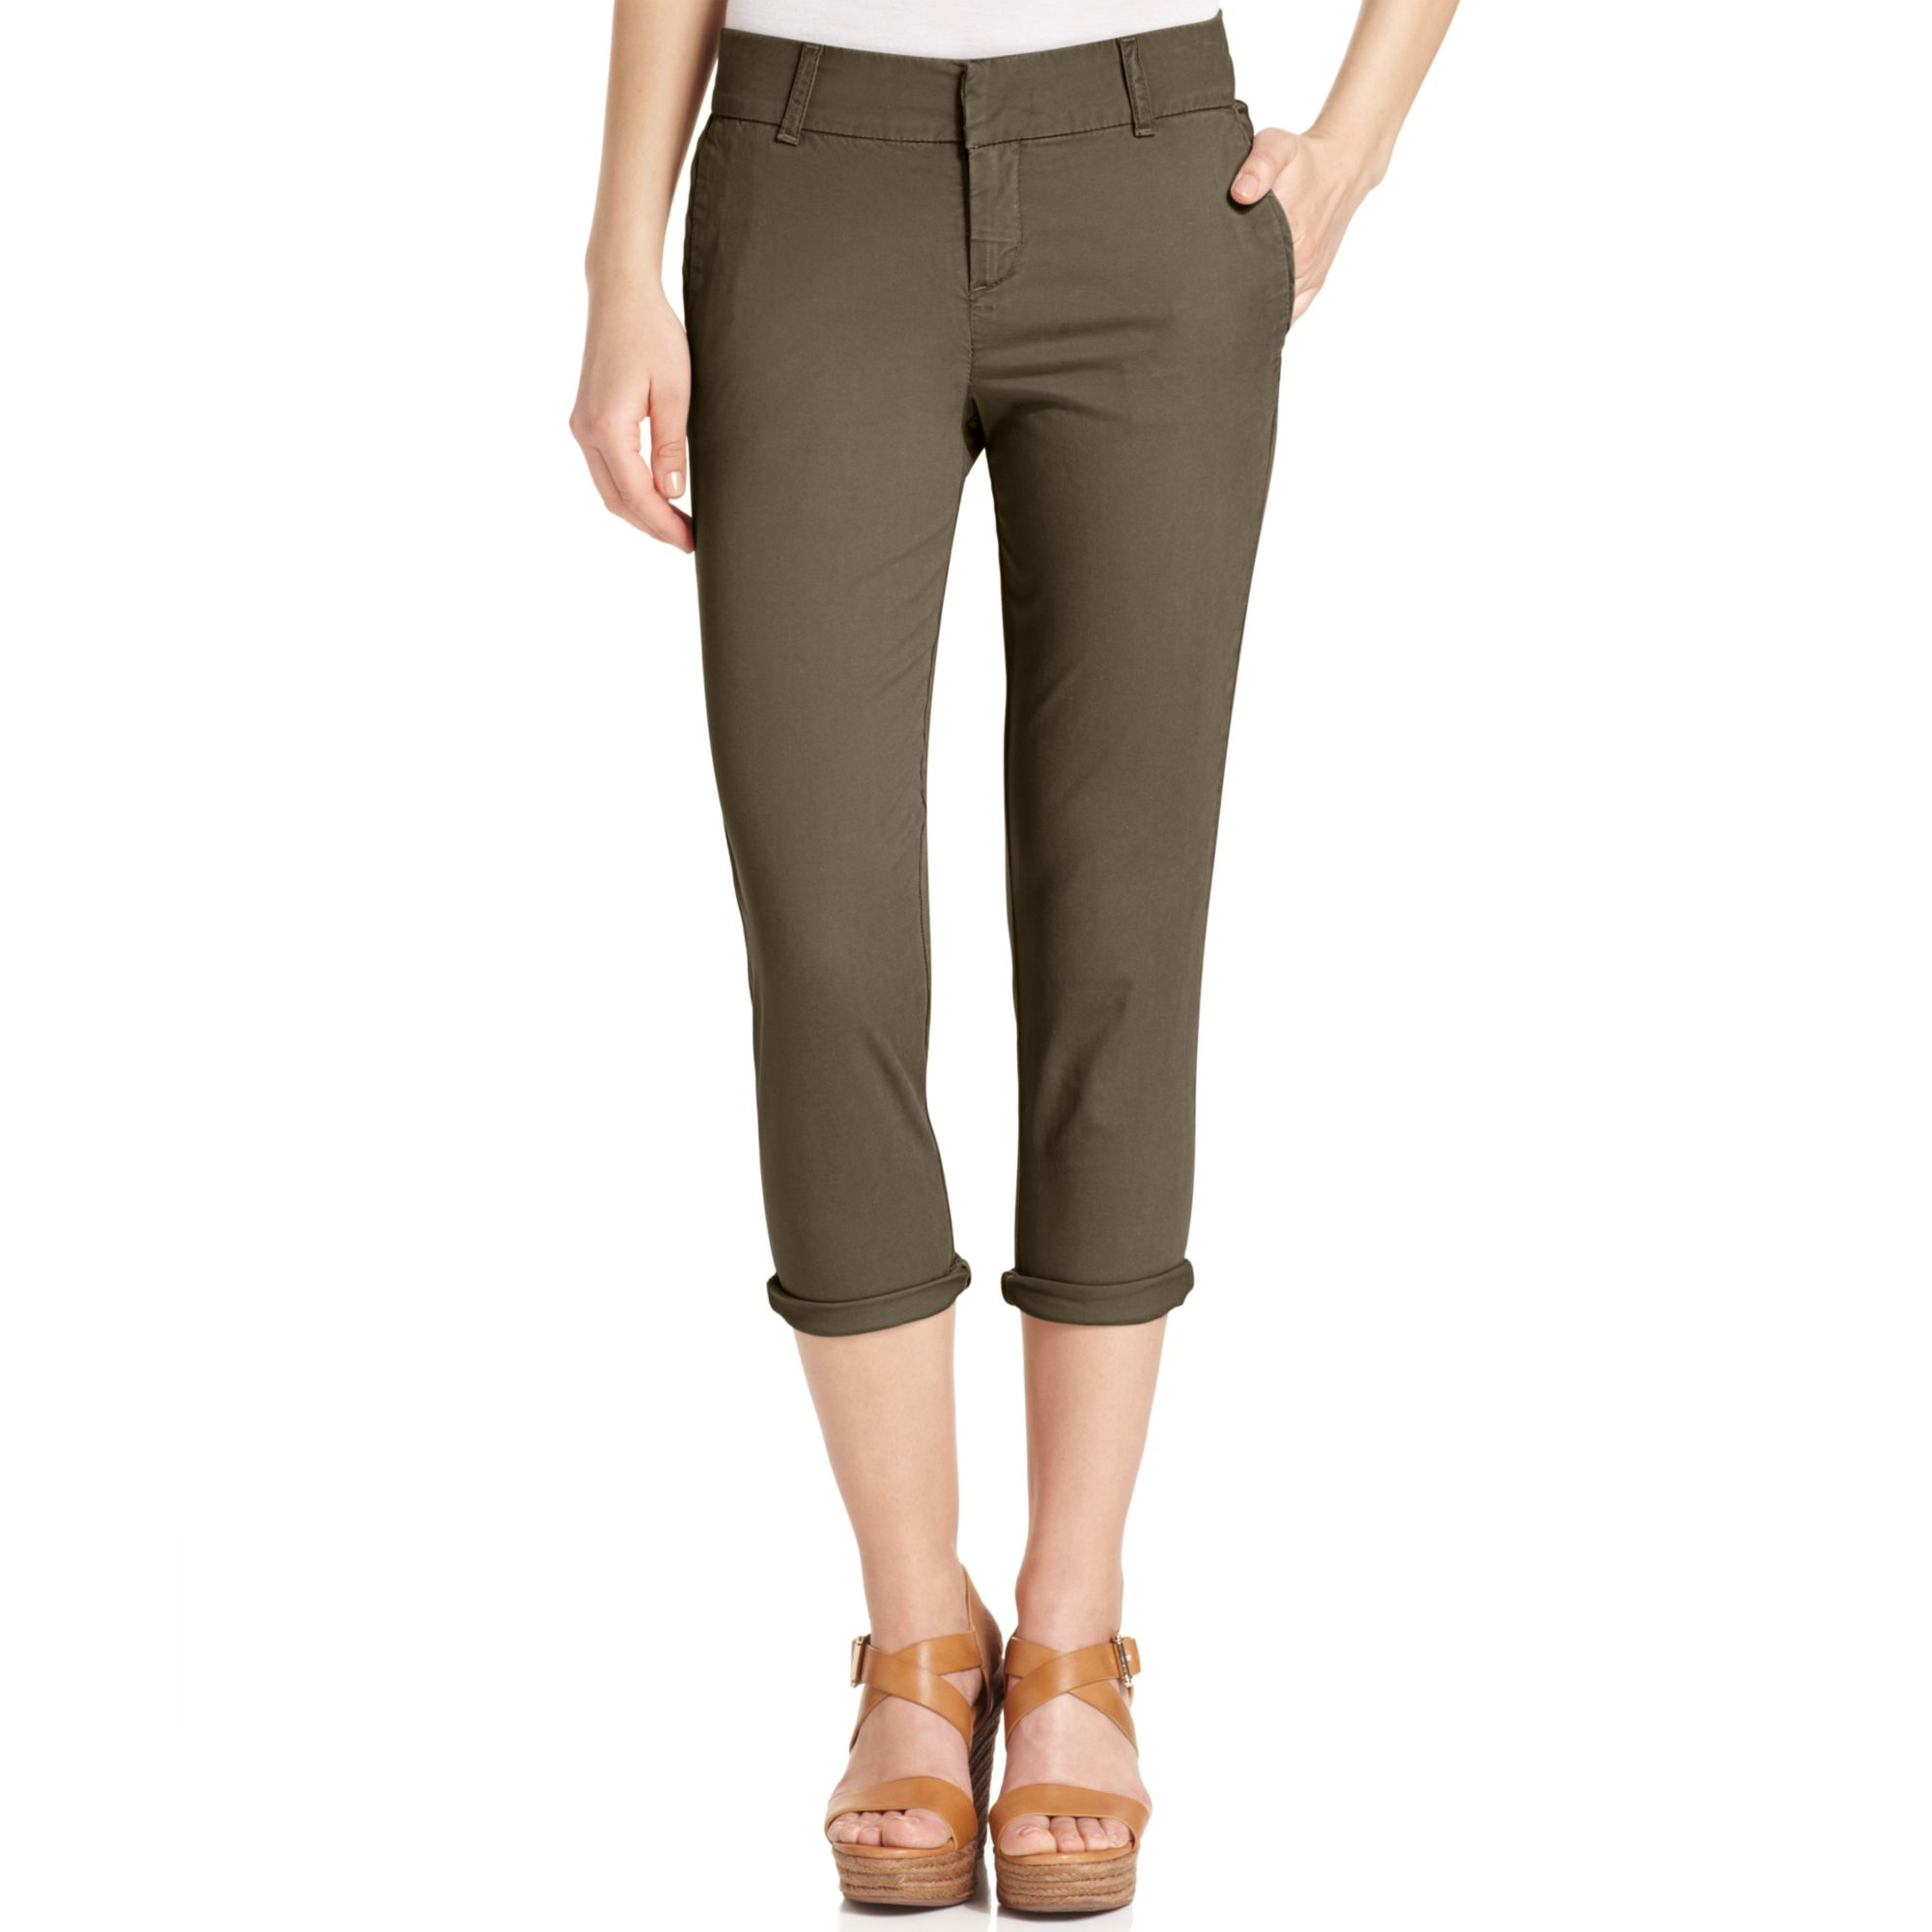 Kut From The Kloth Skinnyleg Cropped Cuffed Pants in Green (Olive) | Lyst